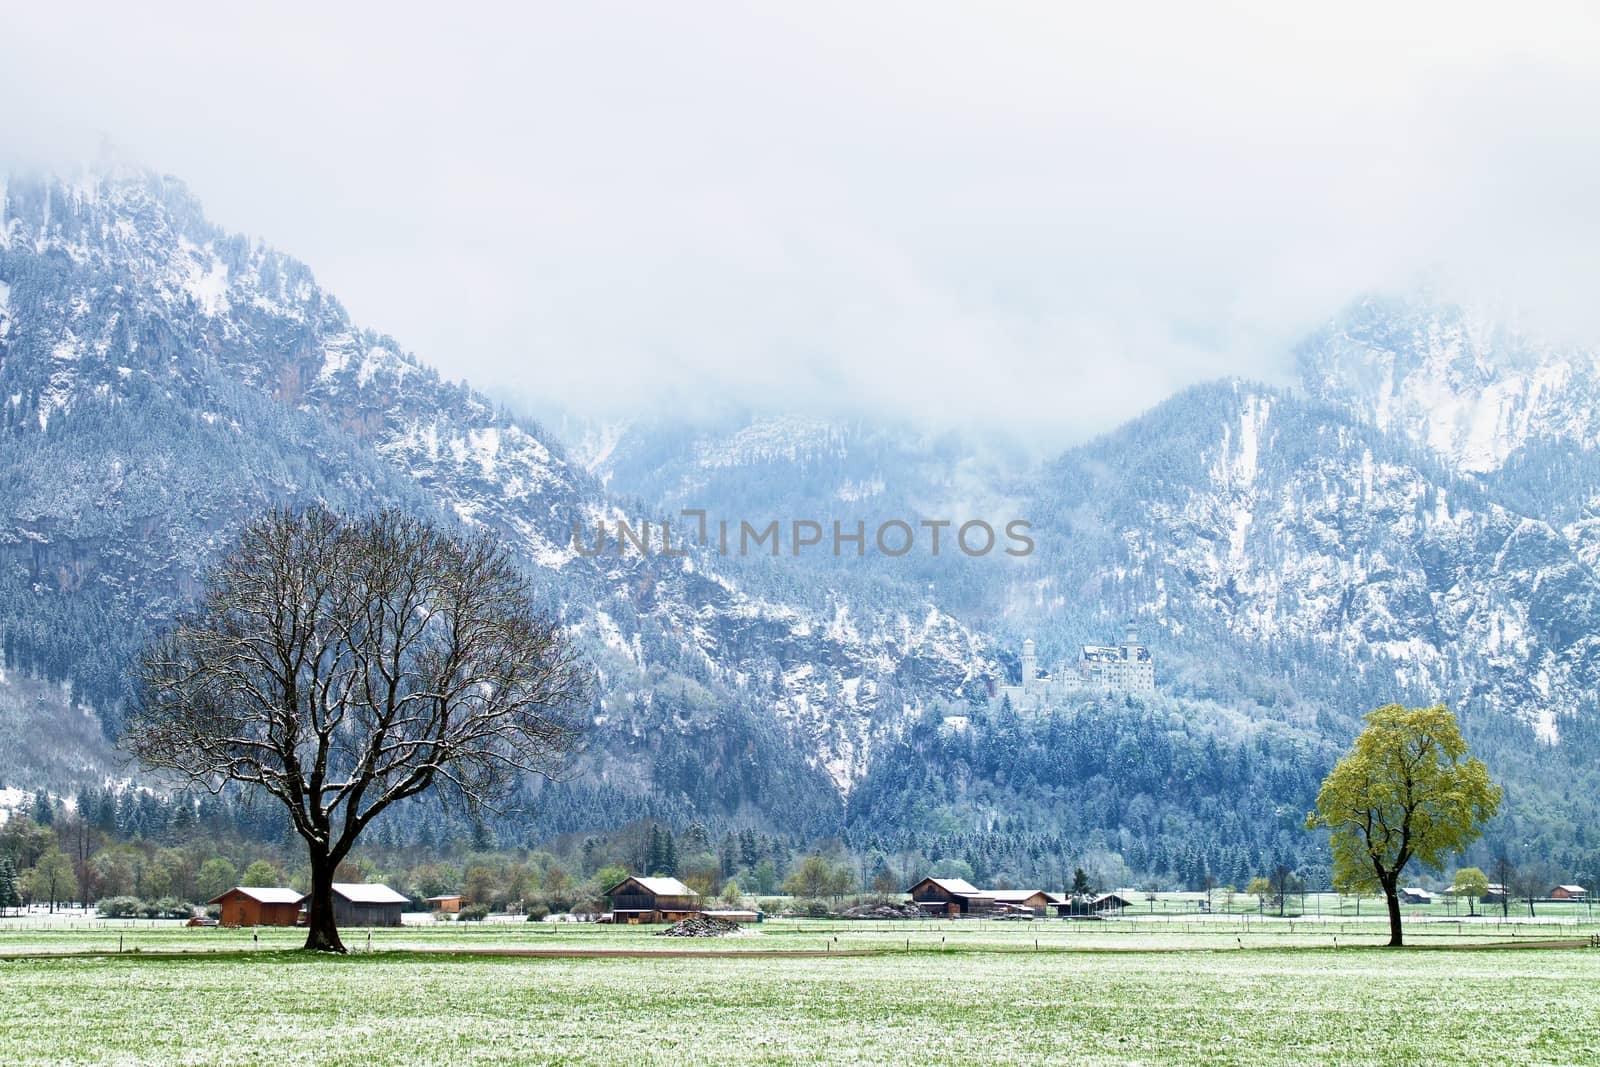 Tree in snowy meadows, april weather. Cold and damp, misty and fogy  day in Alpine mountains. Dark peaks in heavy misty clouds. 